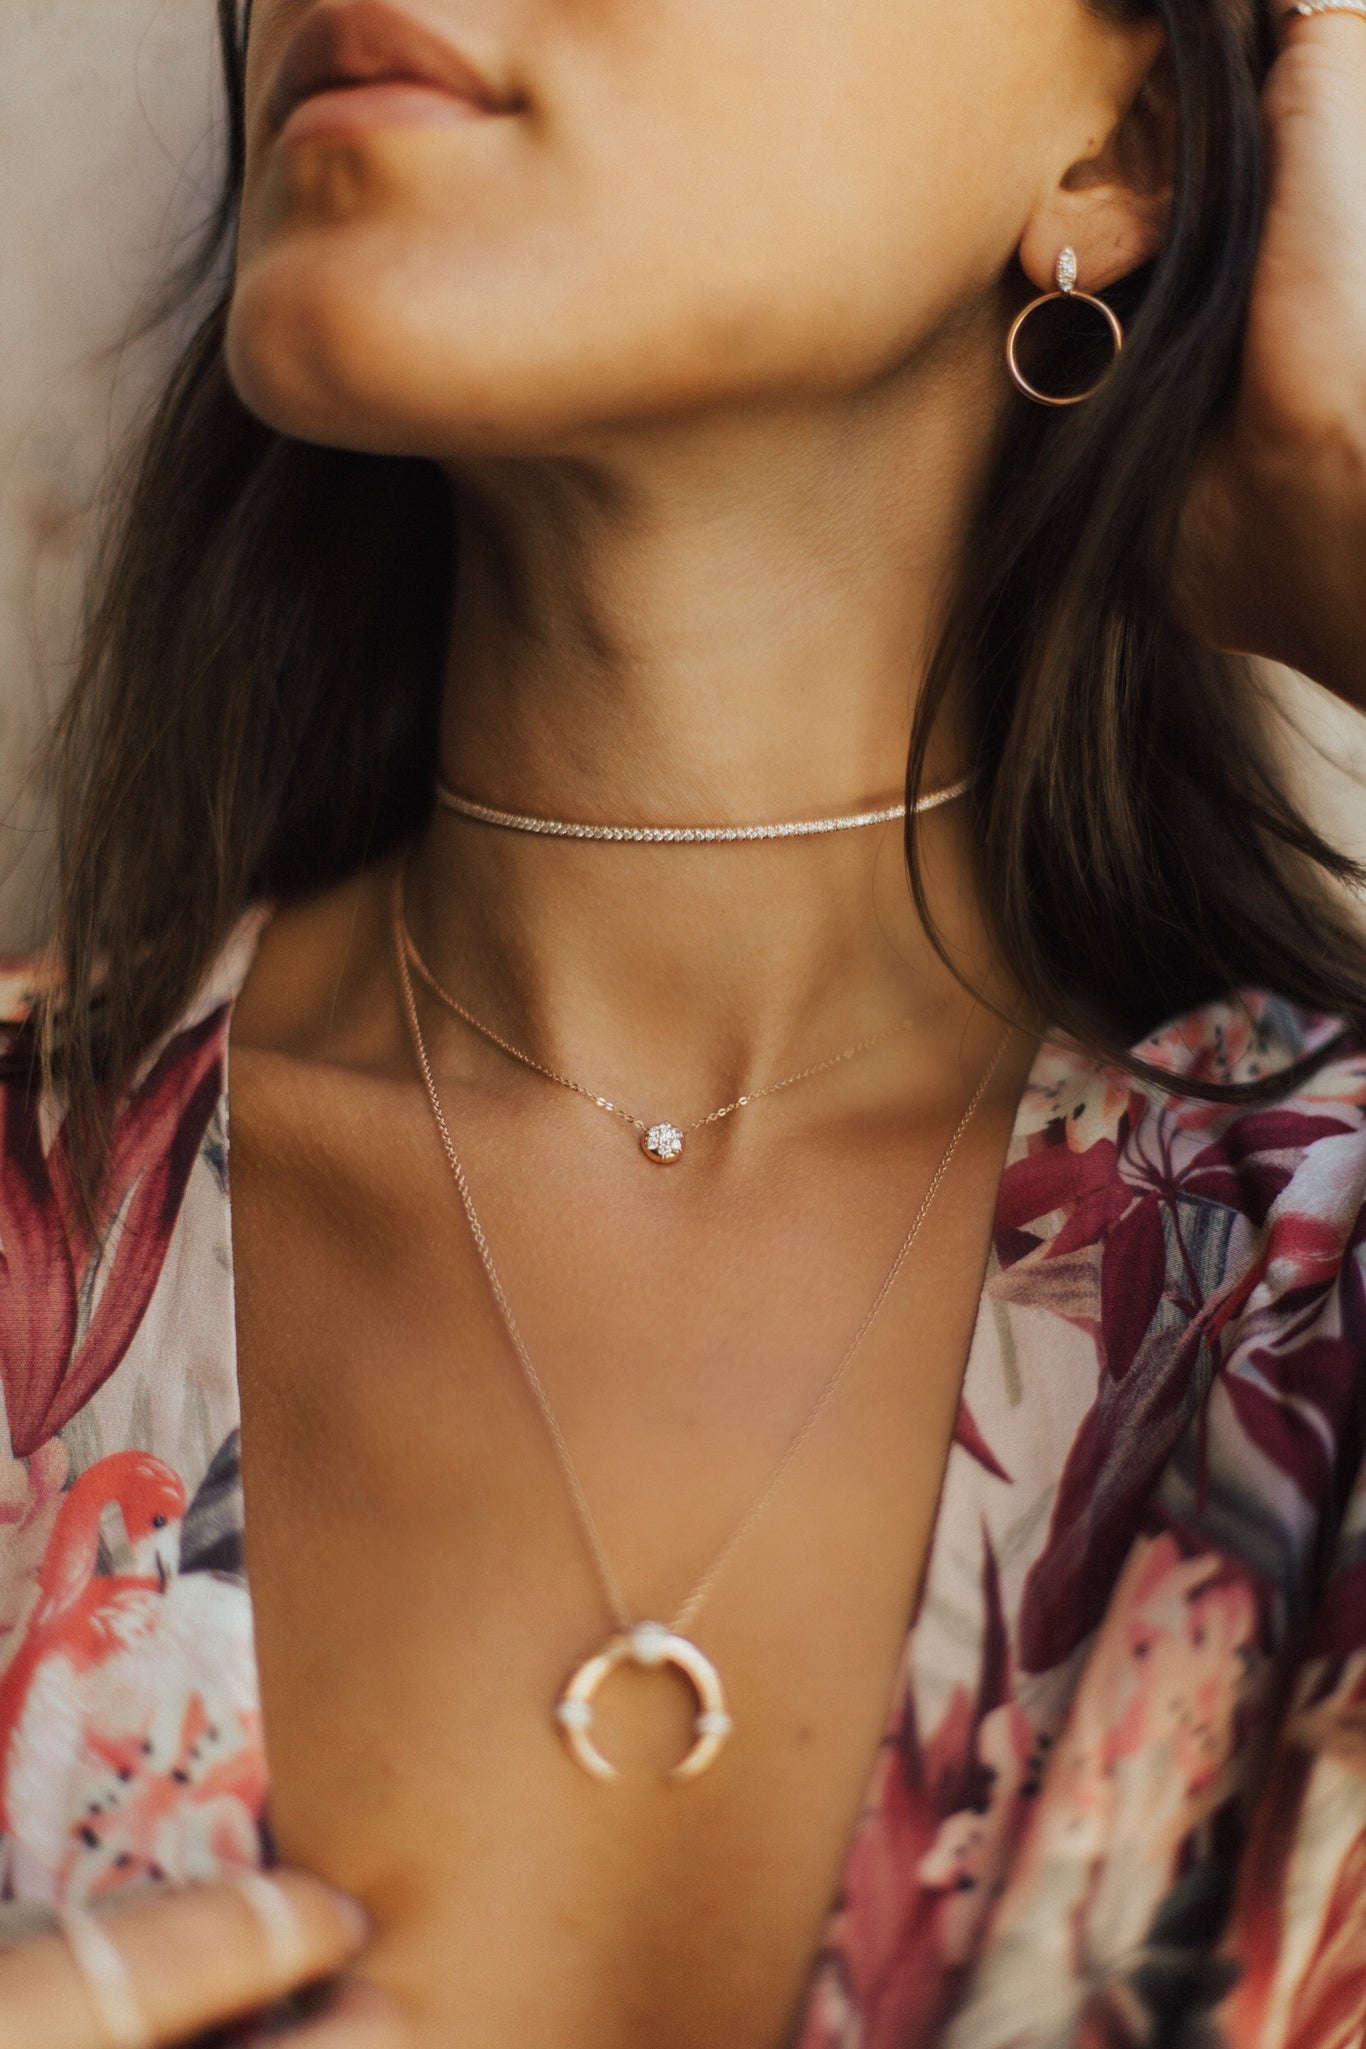 The Bullet Choker Chain shown beautifully layered with the Infinity Choker and Dharma Necklace.